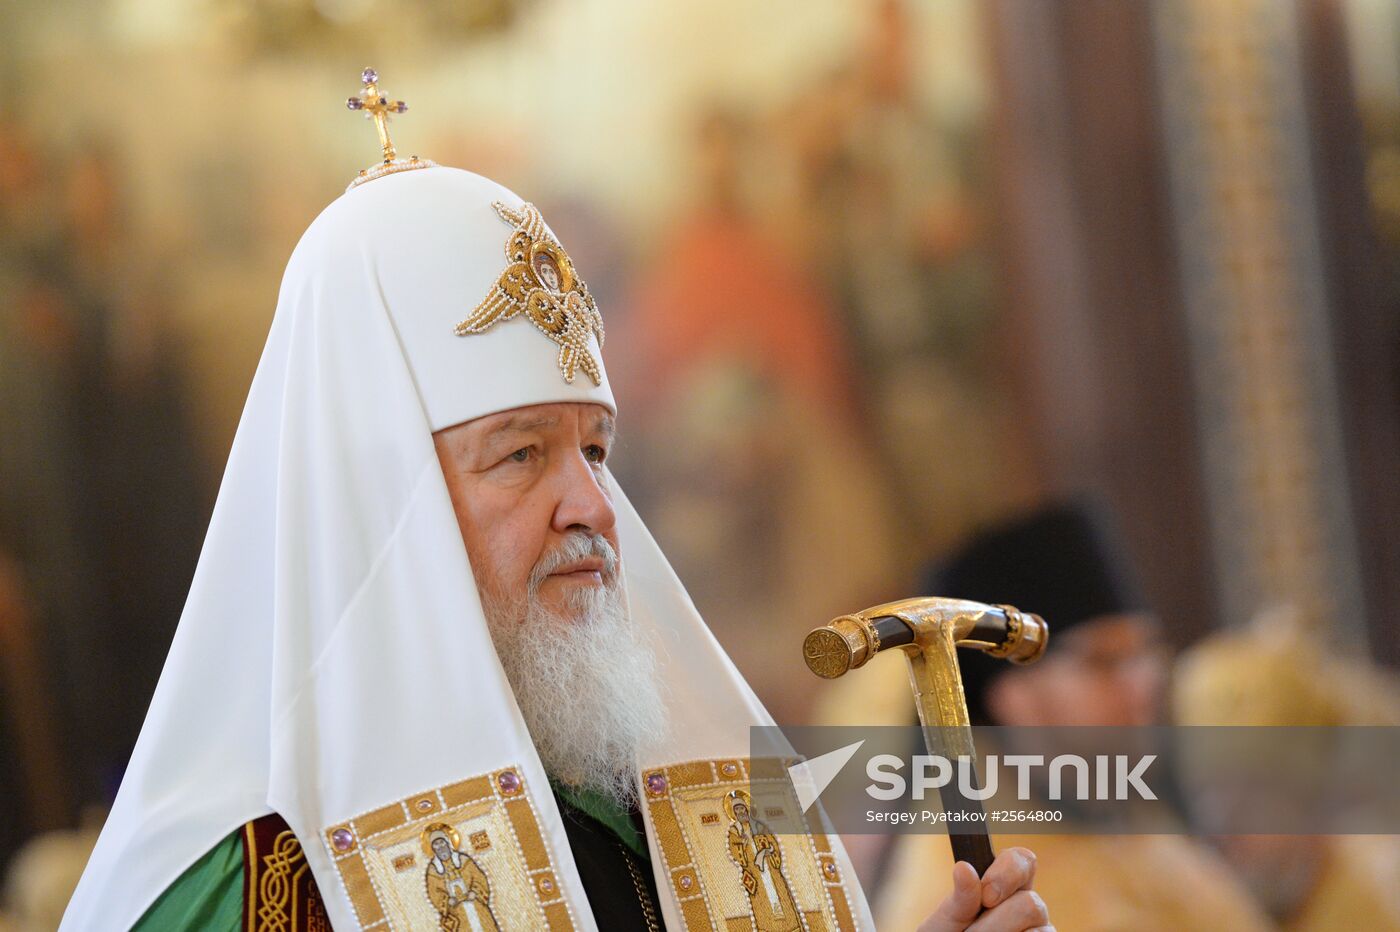 Sixth anniversary of Patriarch Kirill's enthronement